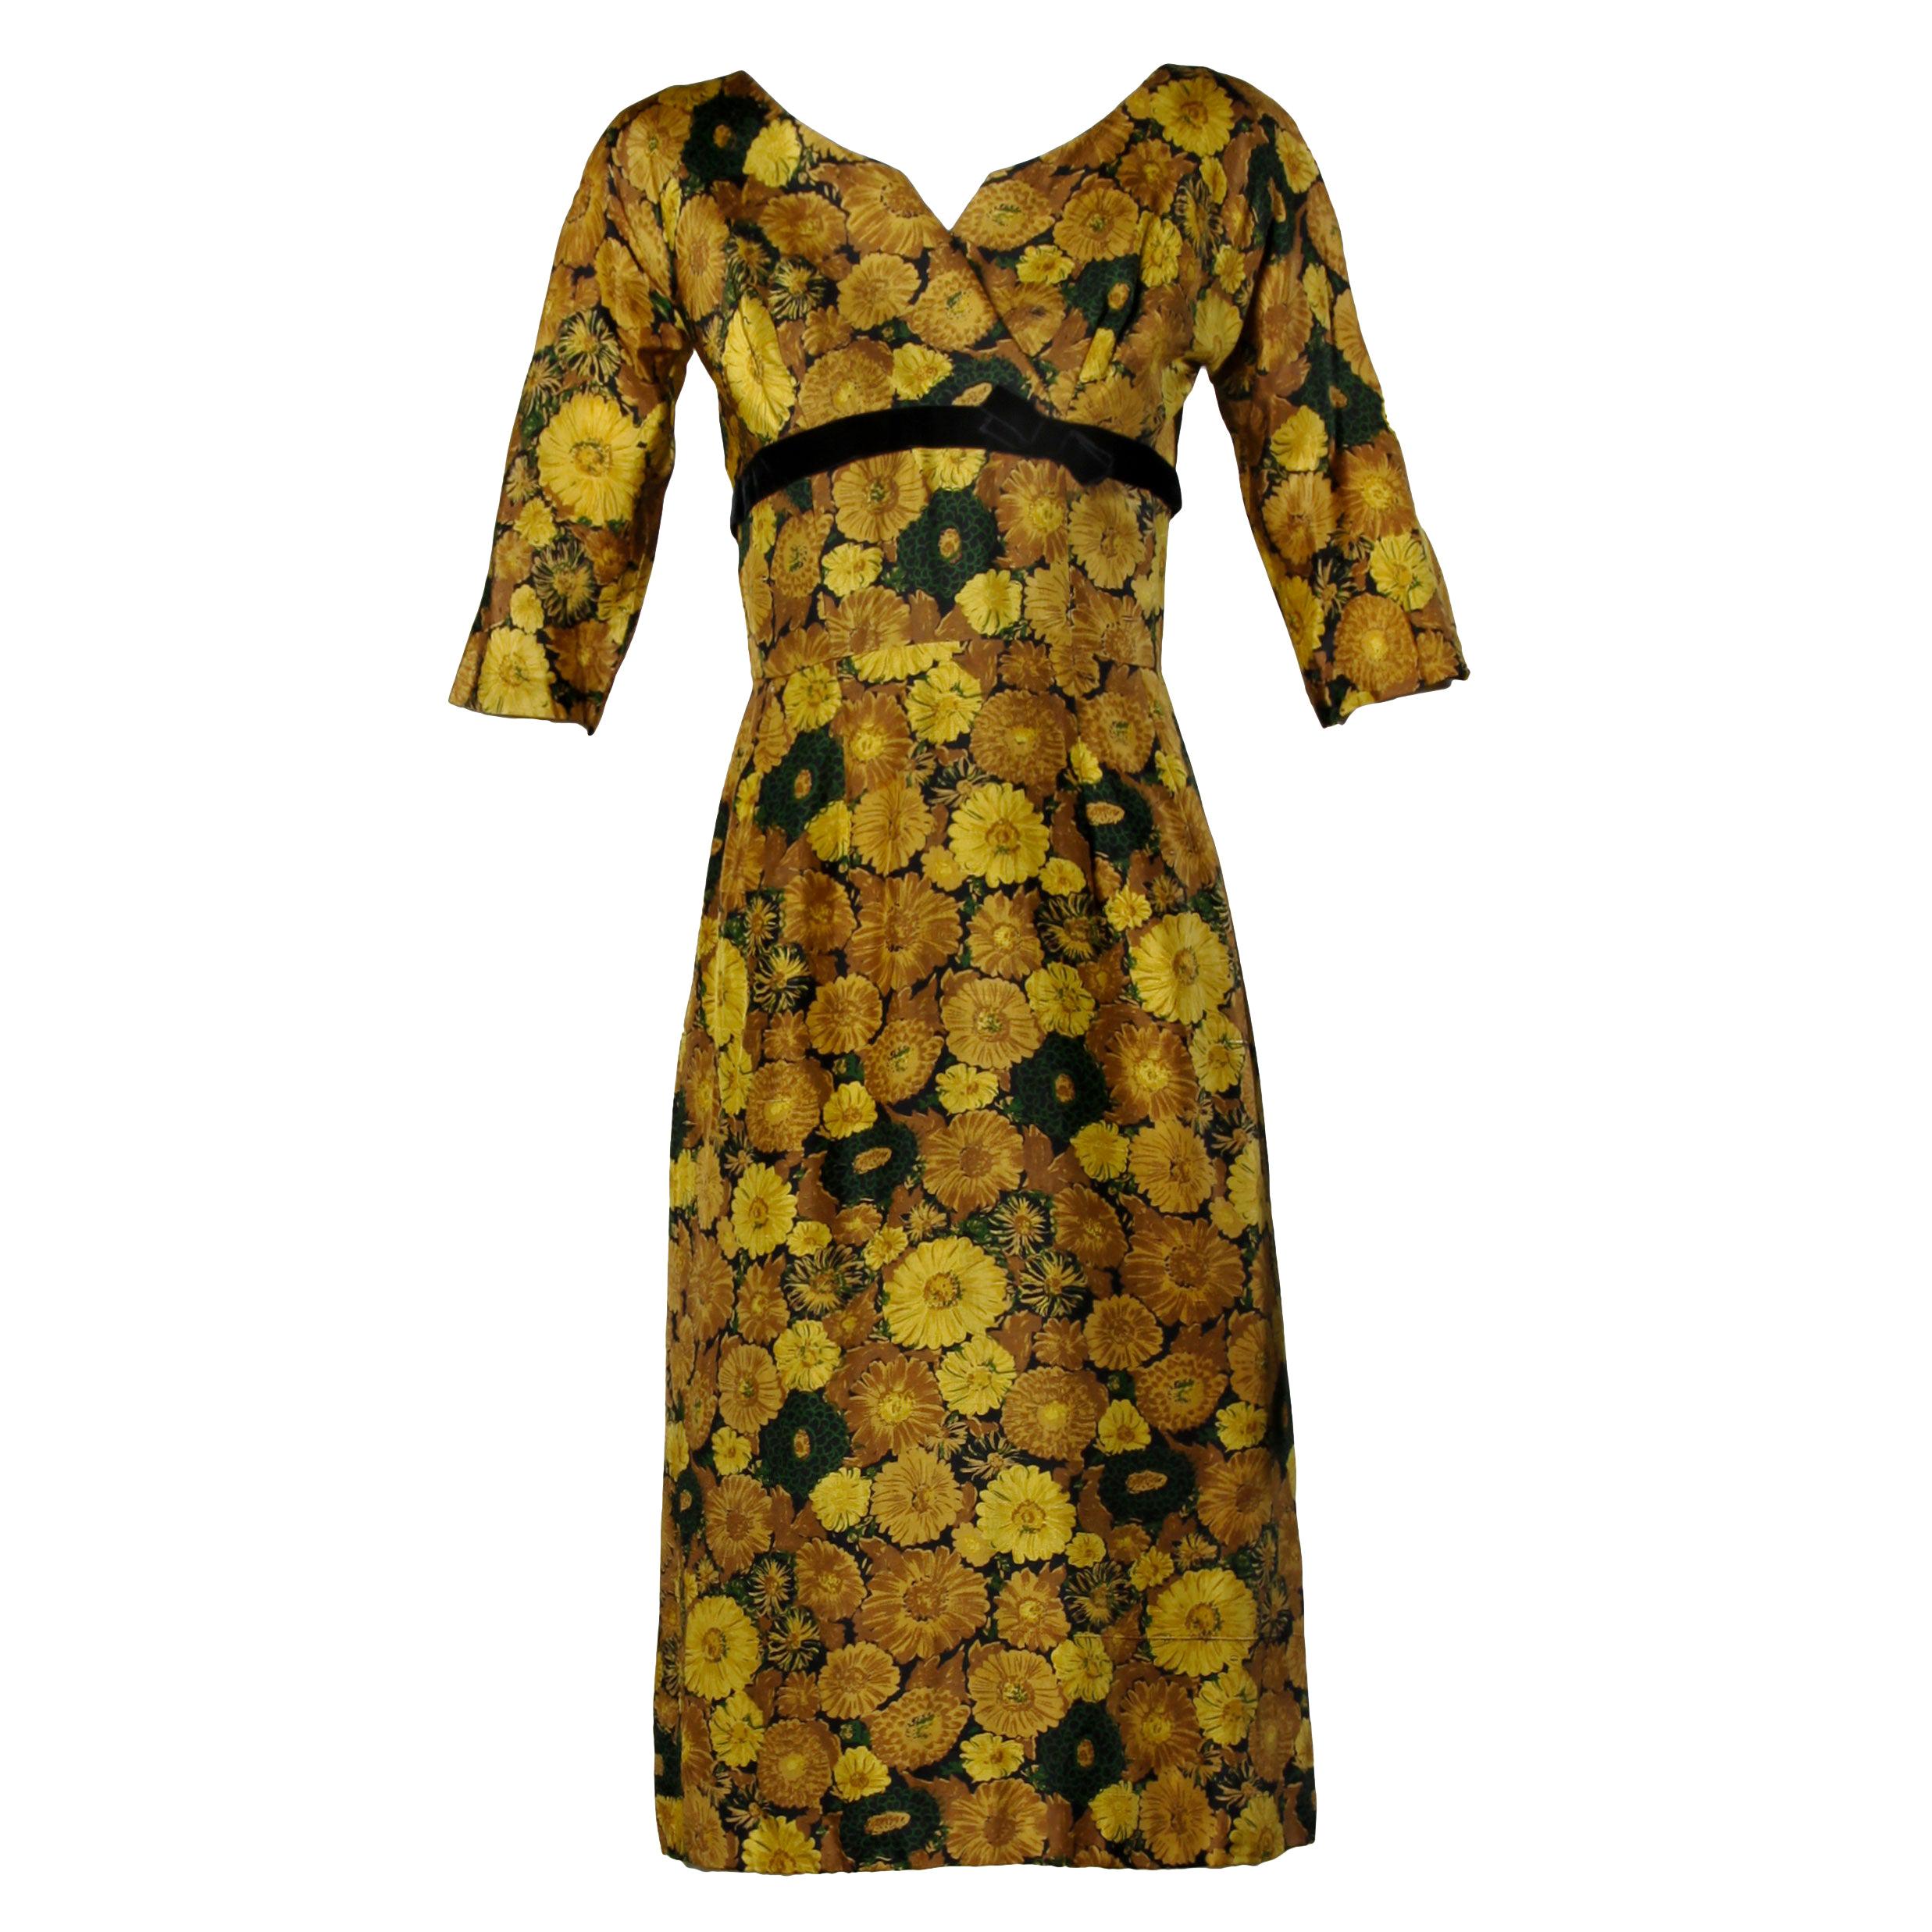 Vintage Silk Yellow Floral Print Cocktail Dress, 1950s-1960s For Sale